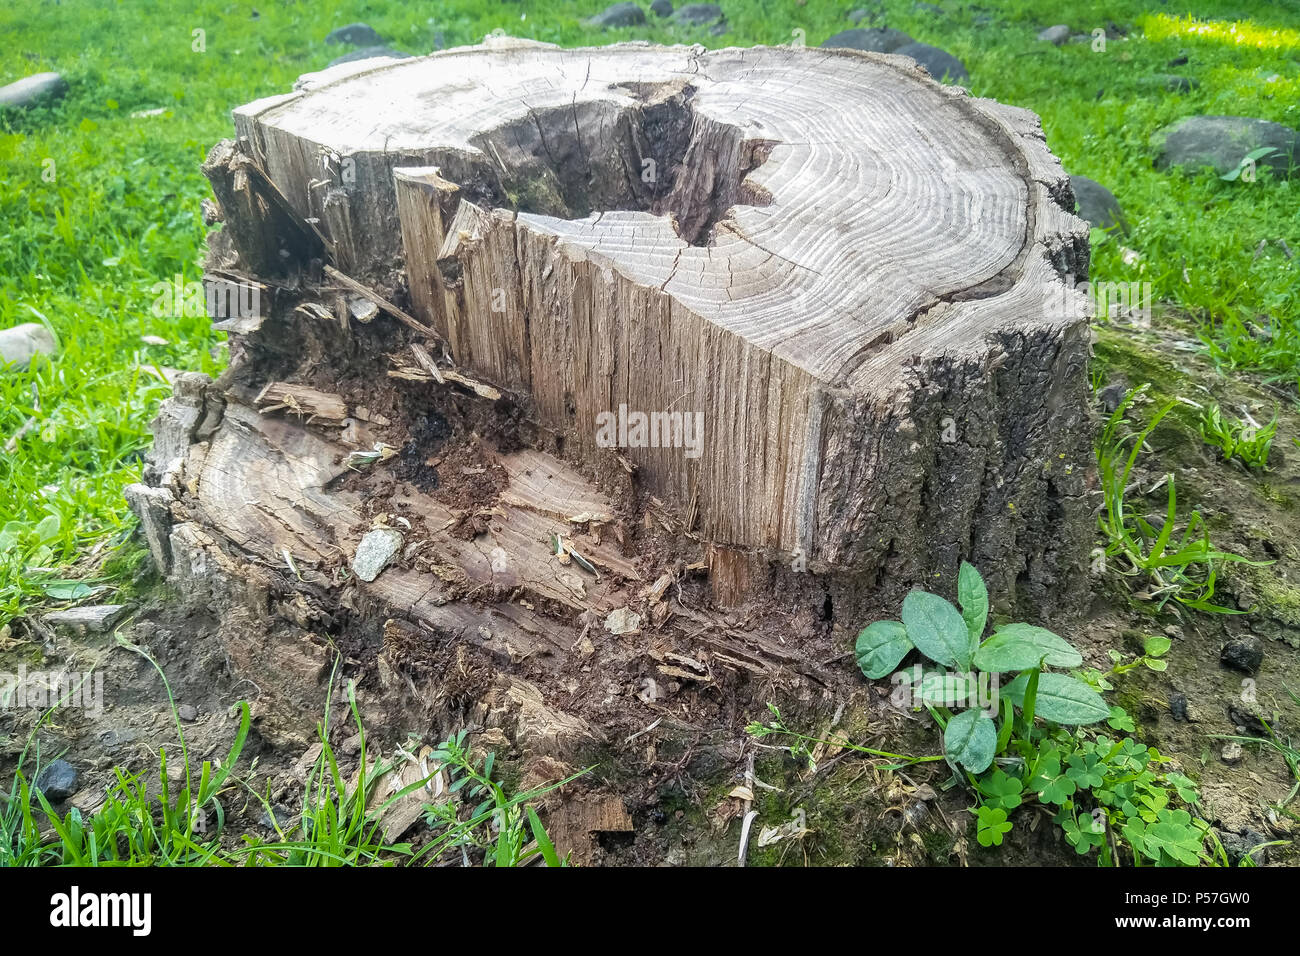 A tree cut at the bottom of the trunk, side view of the cut tree trunk Stock Photo